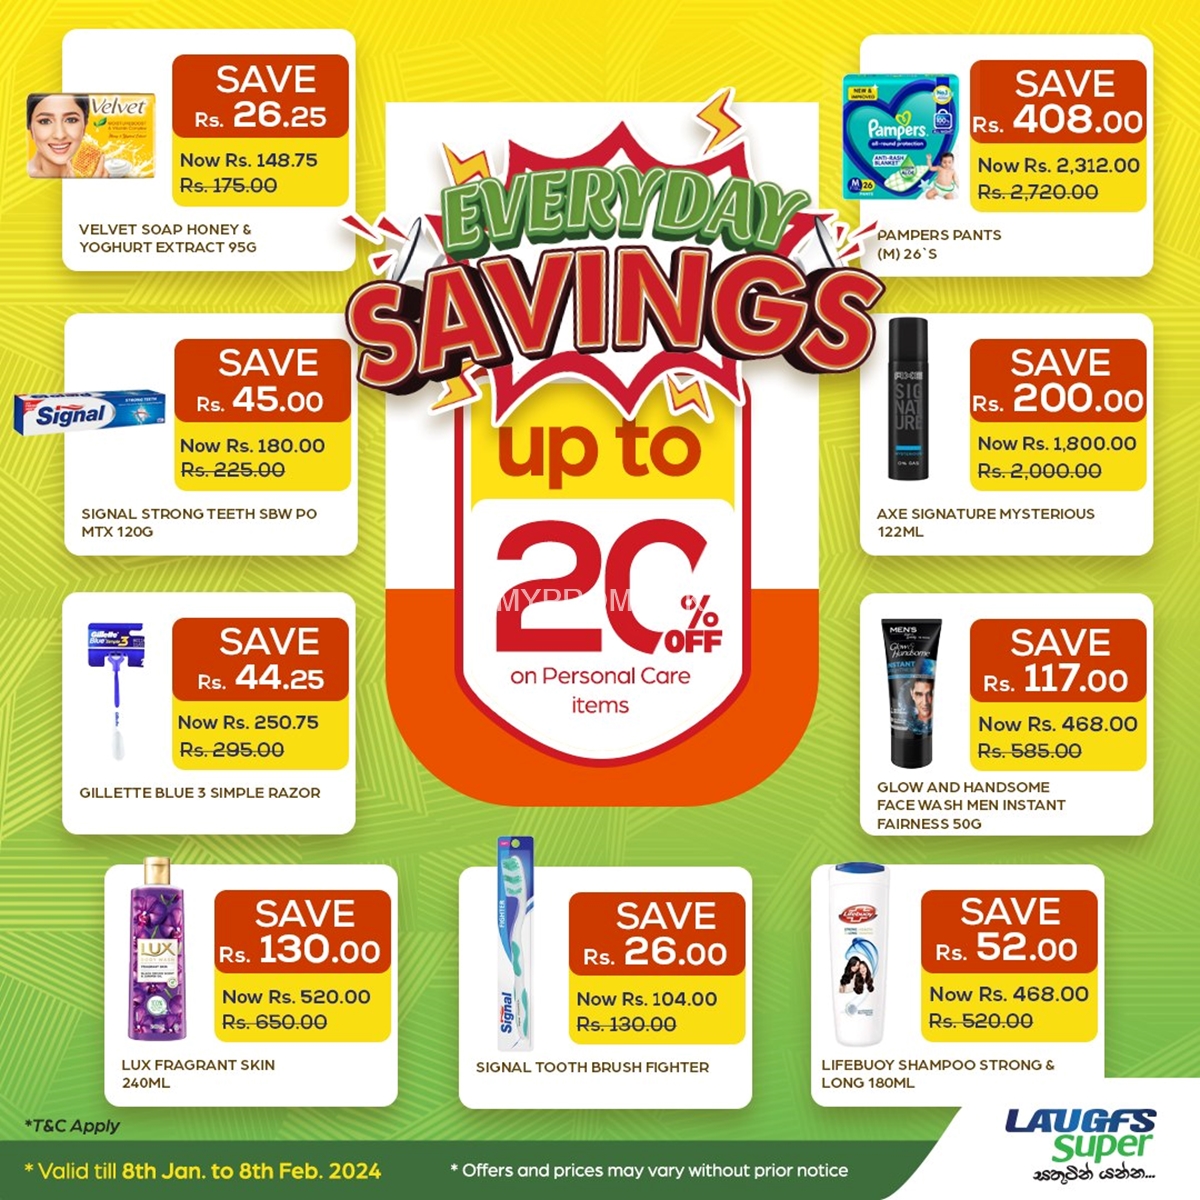 Up to 20% off on Personal care Items at LAUGFS Supermarket